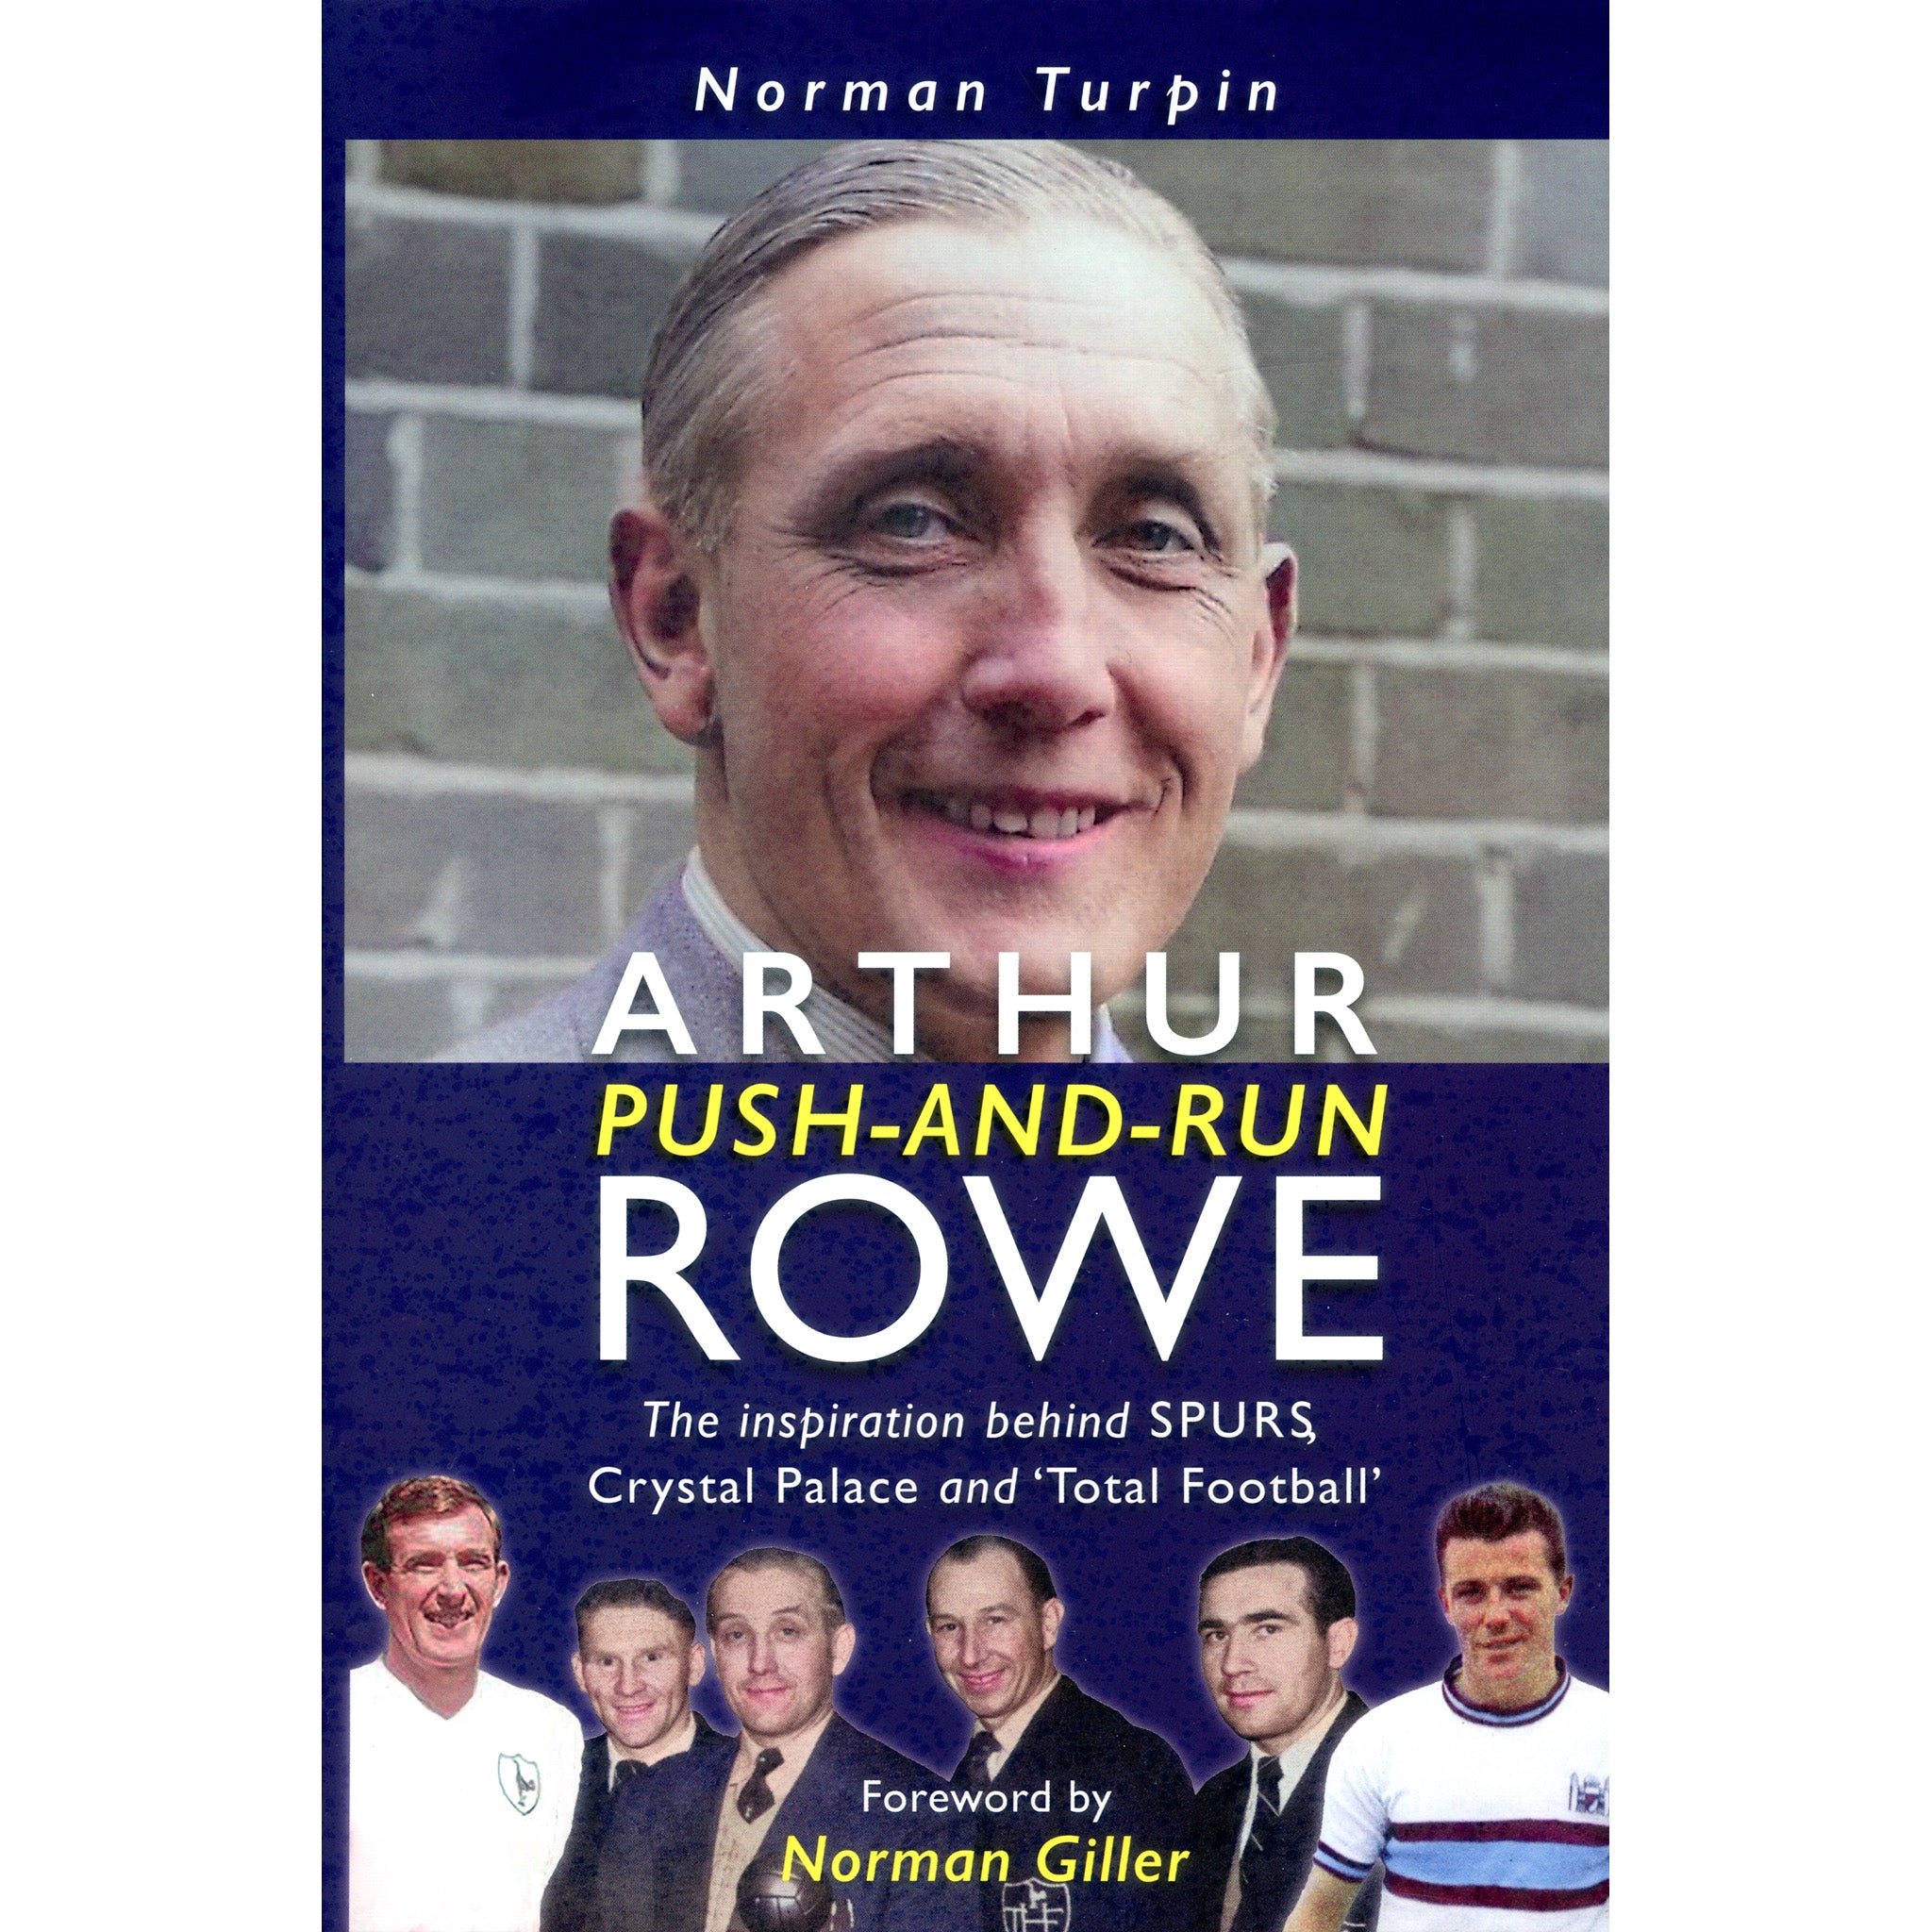 Arthur 'push-and-run' Rowe – The inspiration behind Spurs, Crystal Palace and 'Total Football'